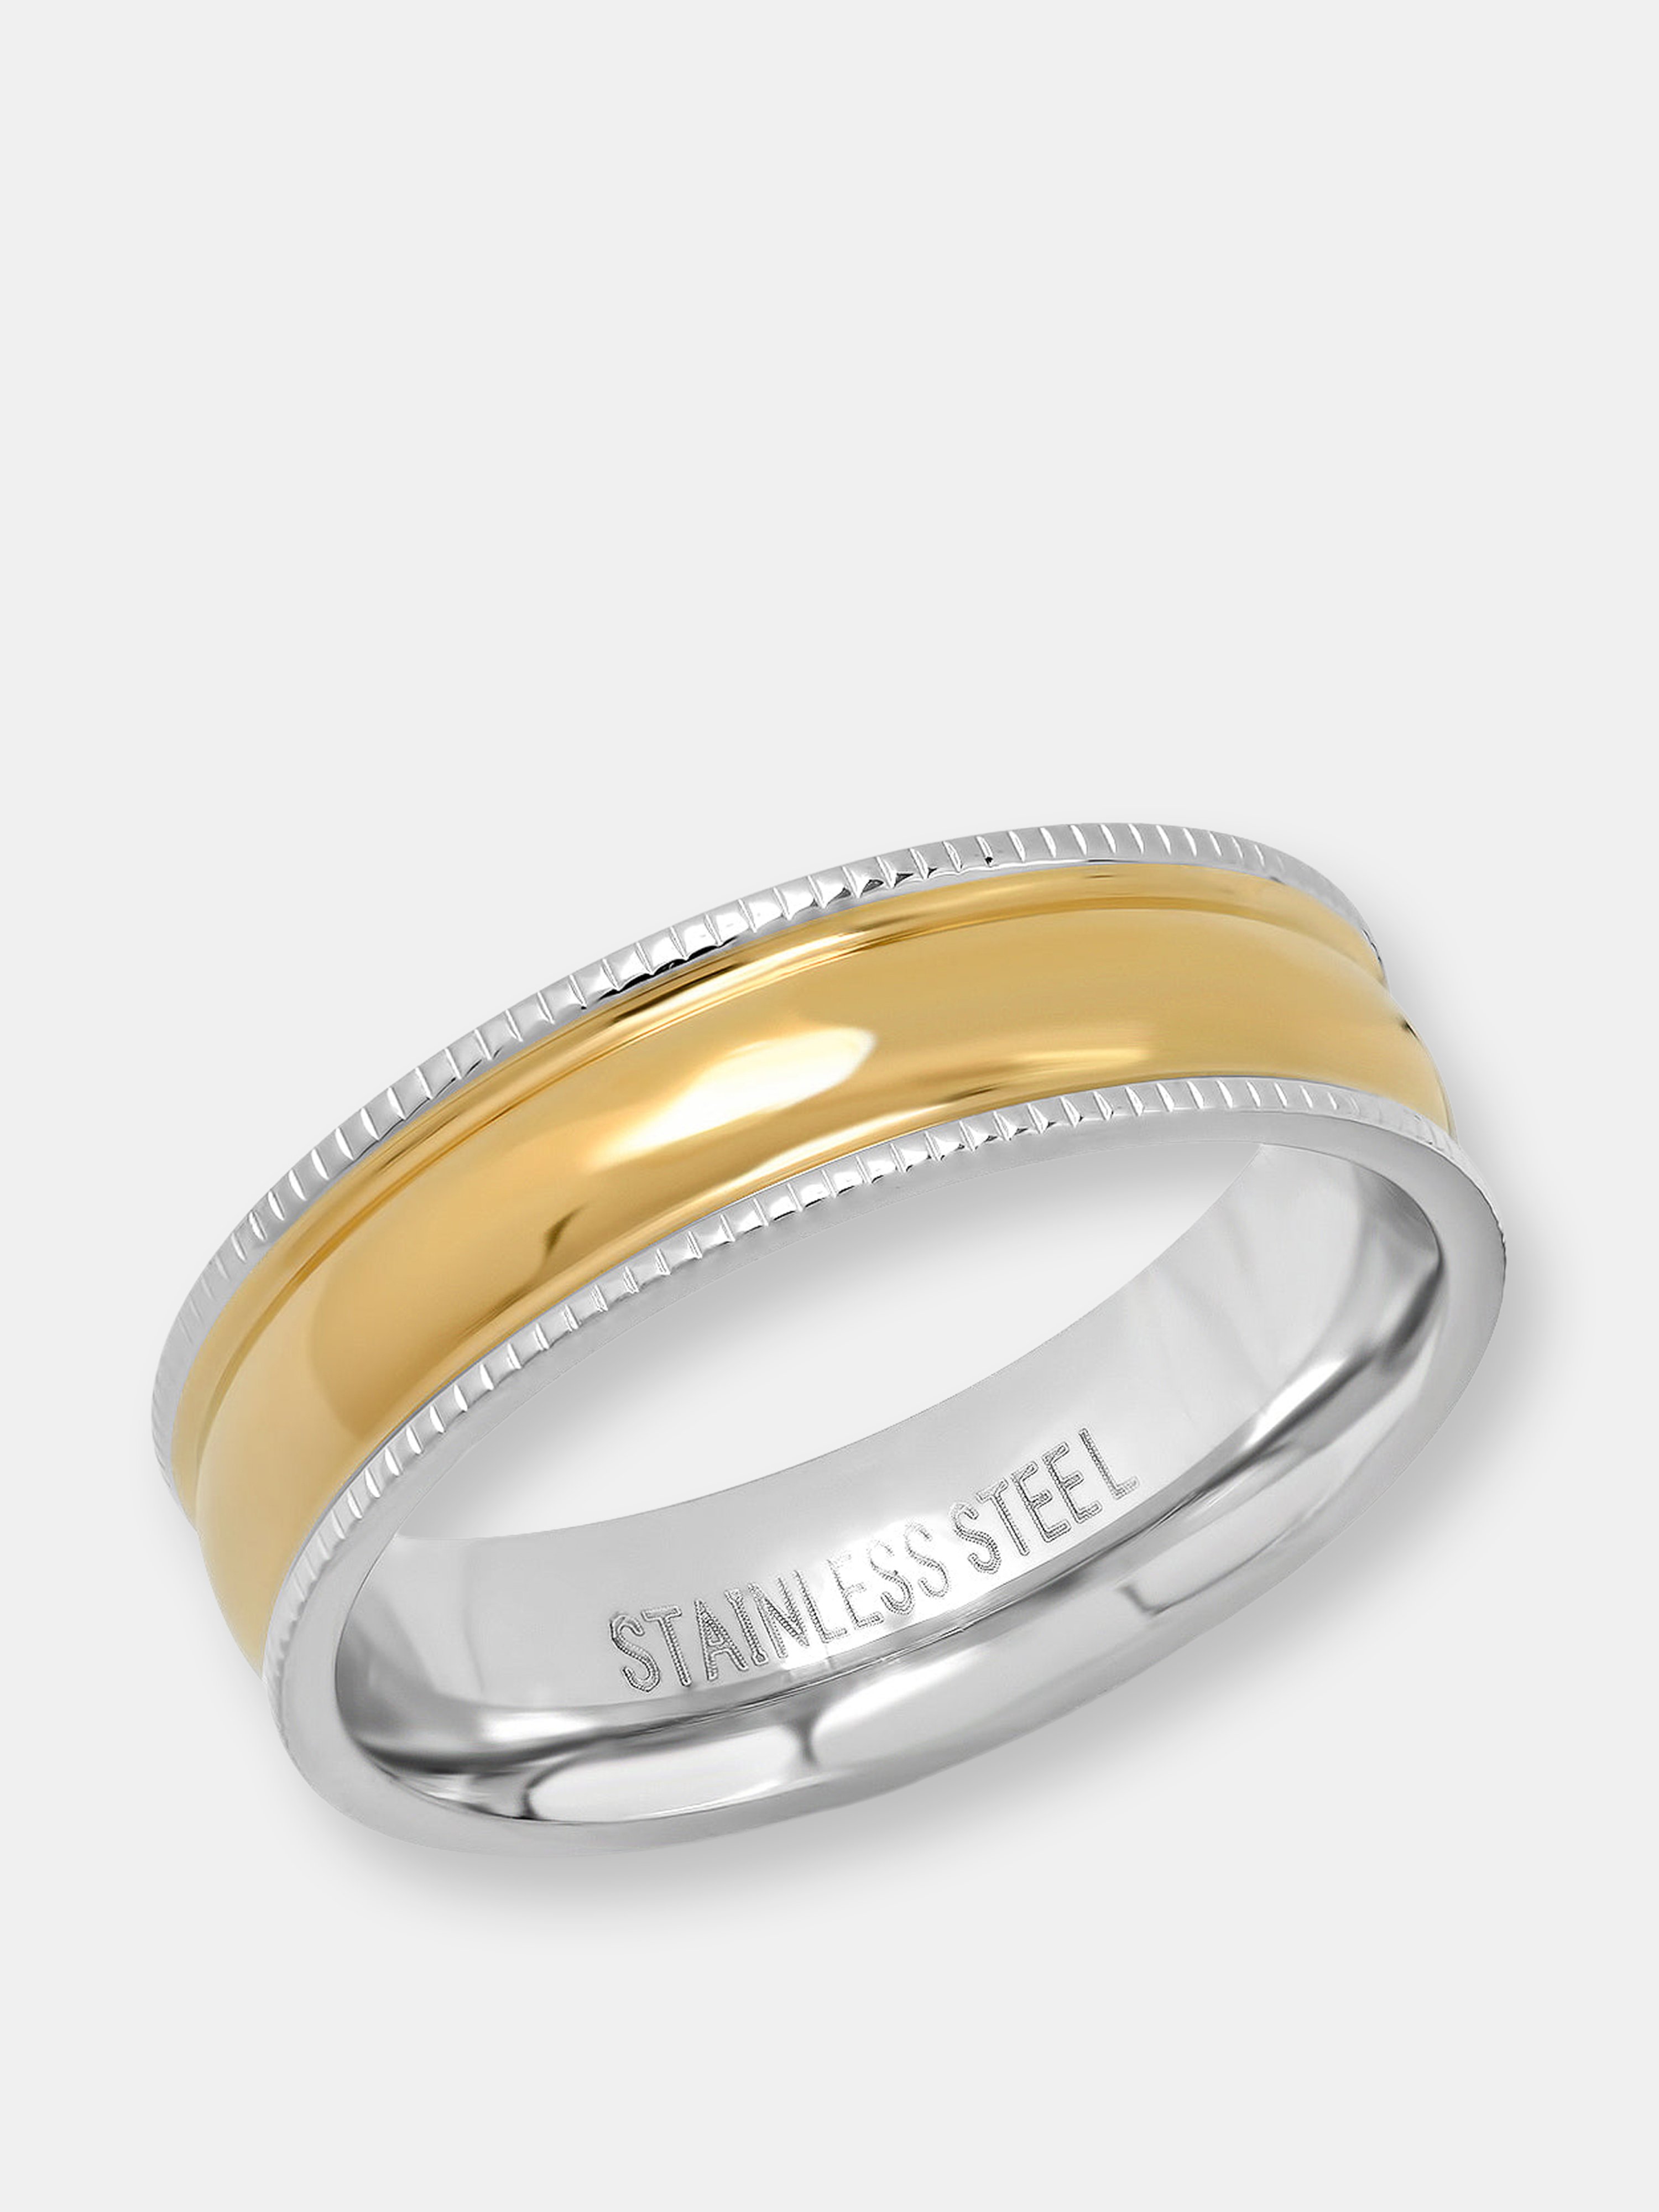 Hmy Jewelry Steeltime Two Tone Band Ring In Gold